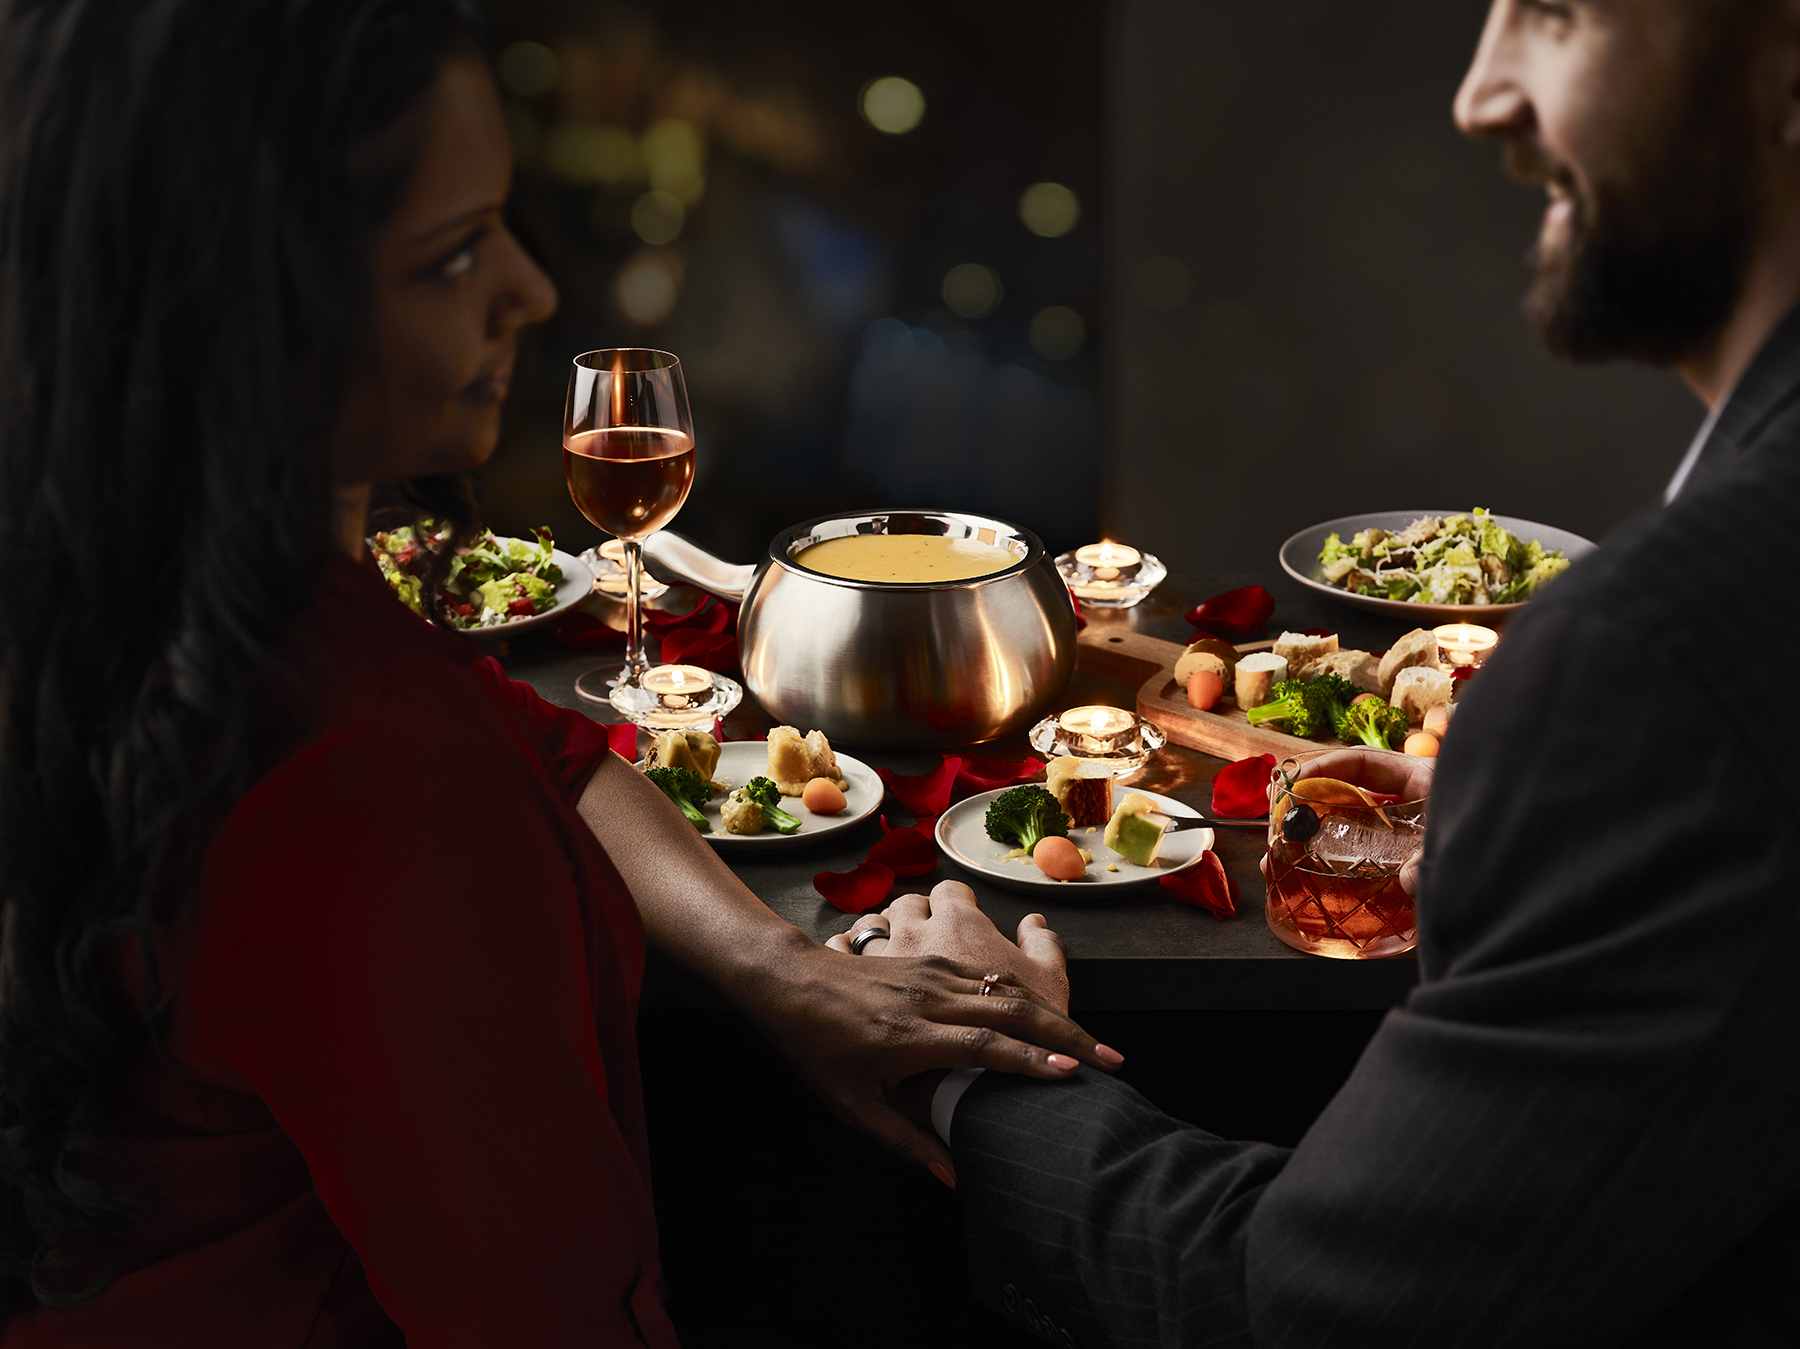 Melting Pot rekindles date night by introducing Thursdate, a dedicated weekly night of romance